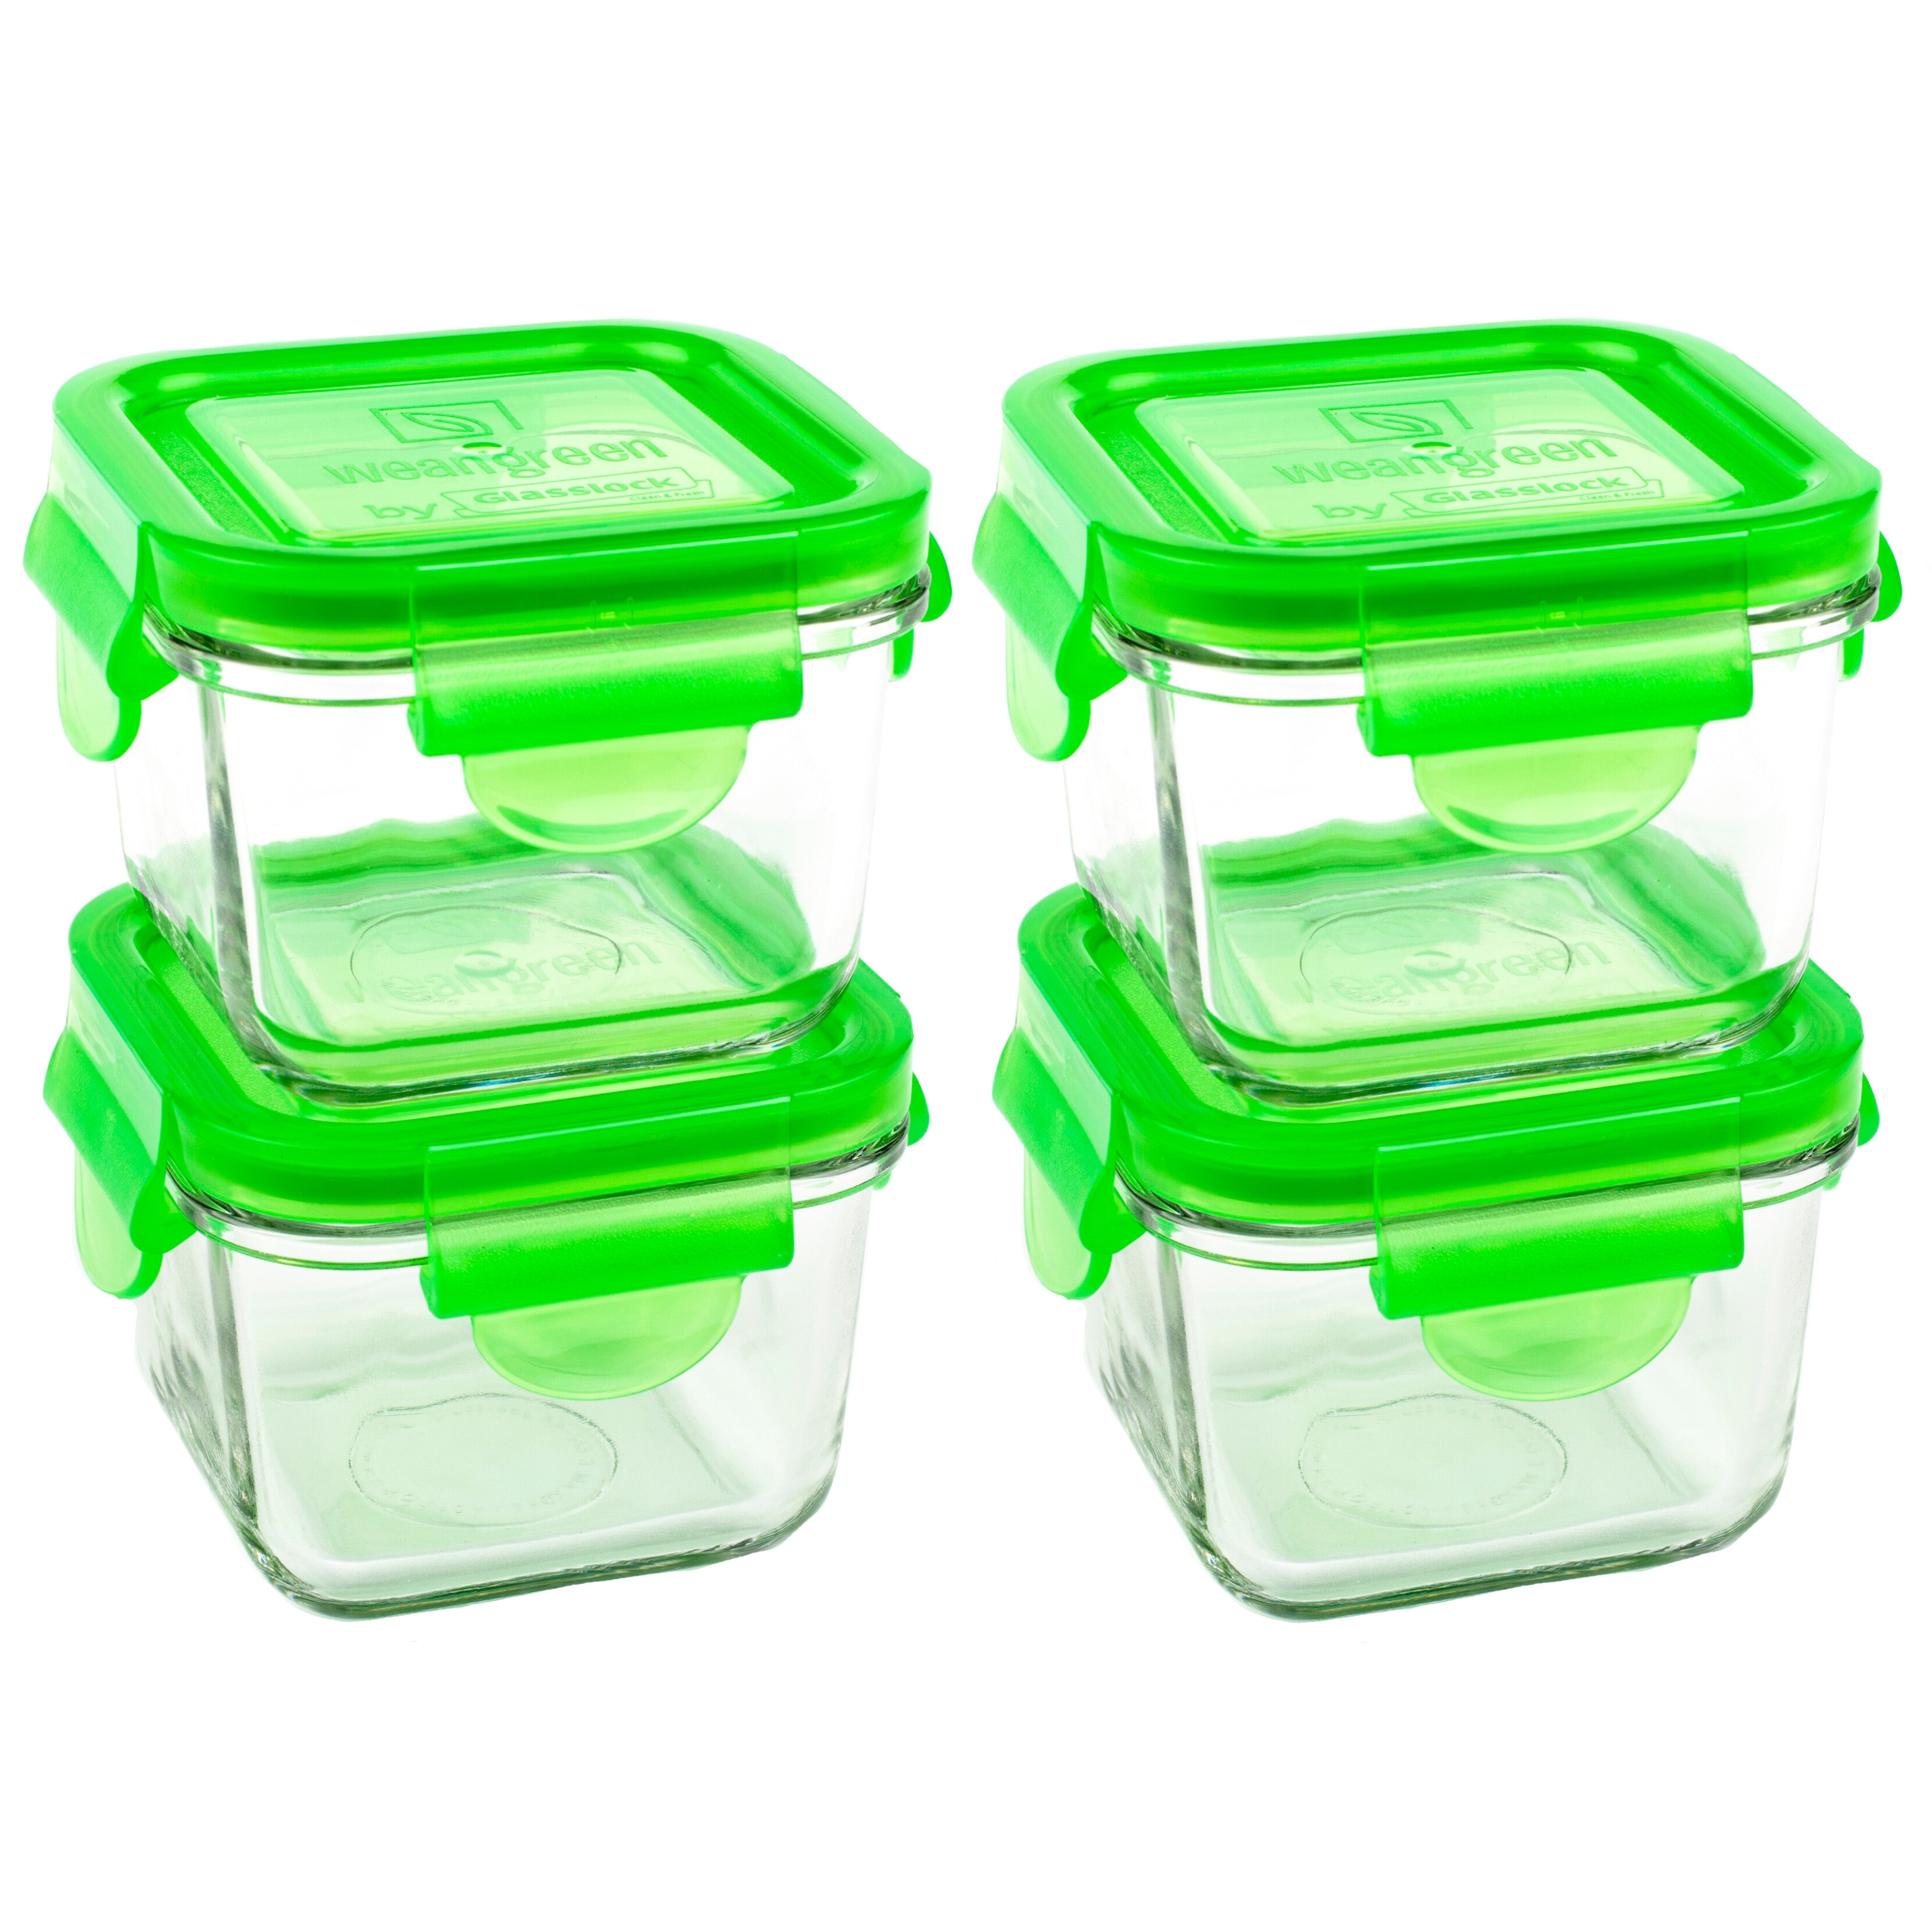 Snack Cubes 4-Pack - Pea